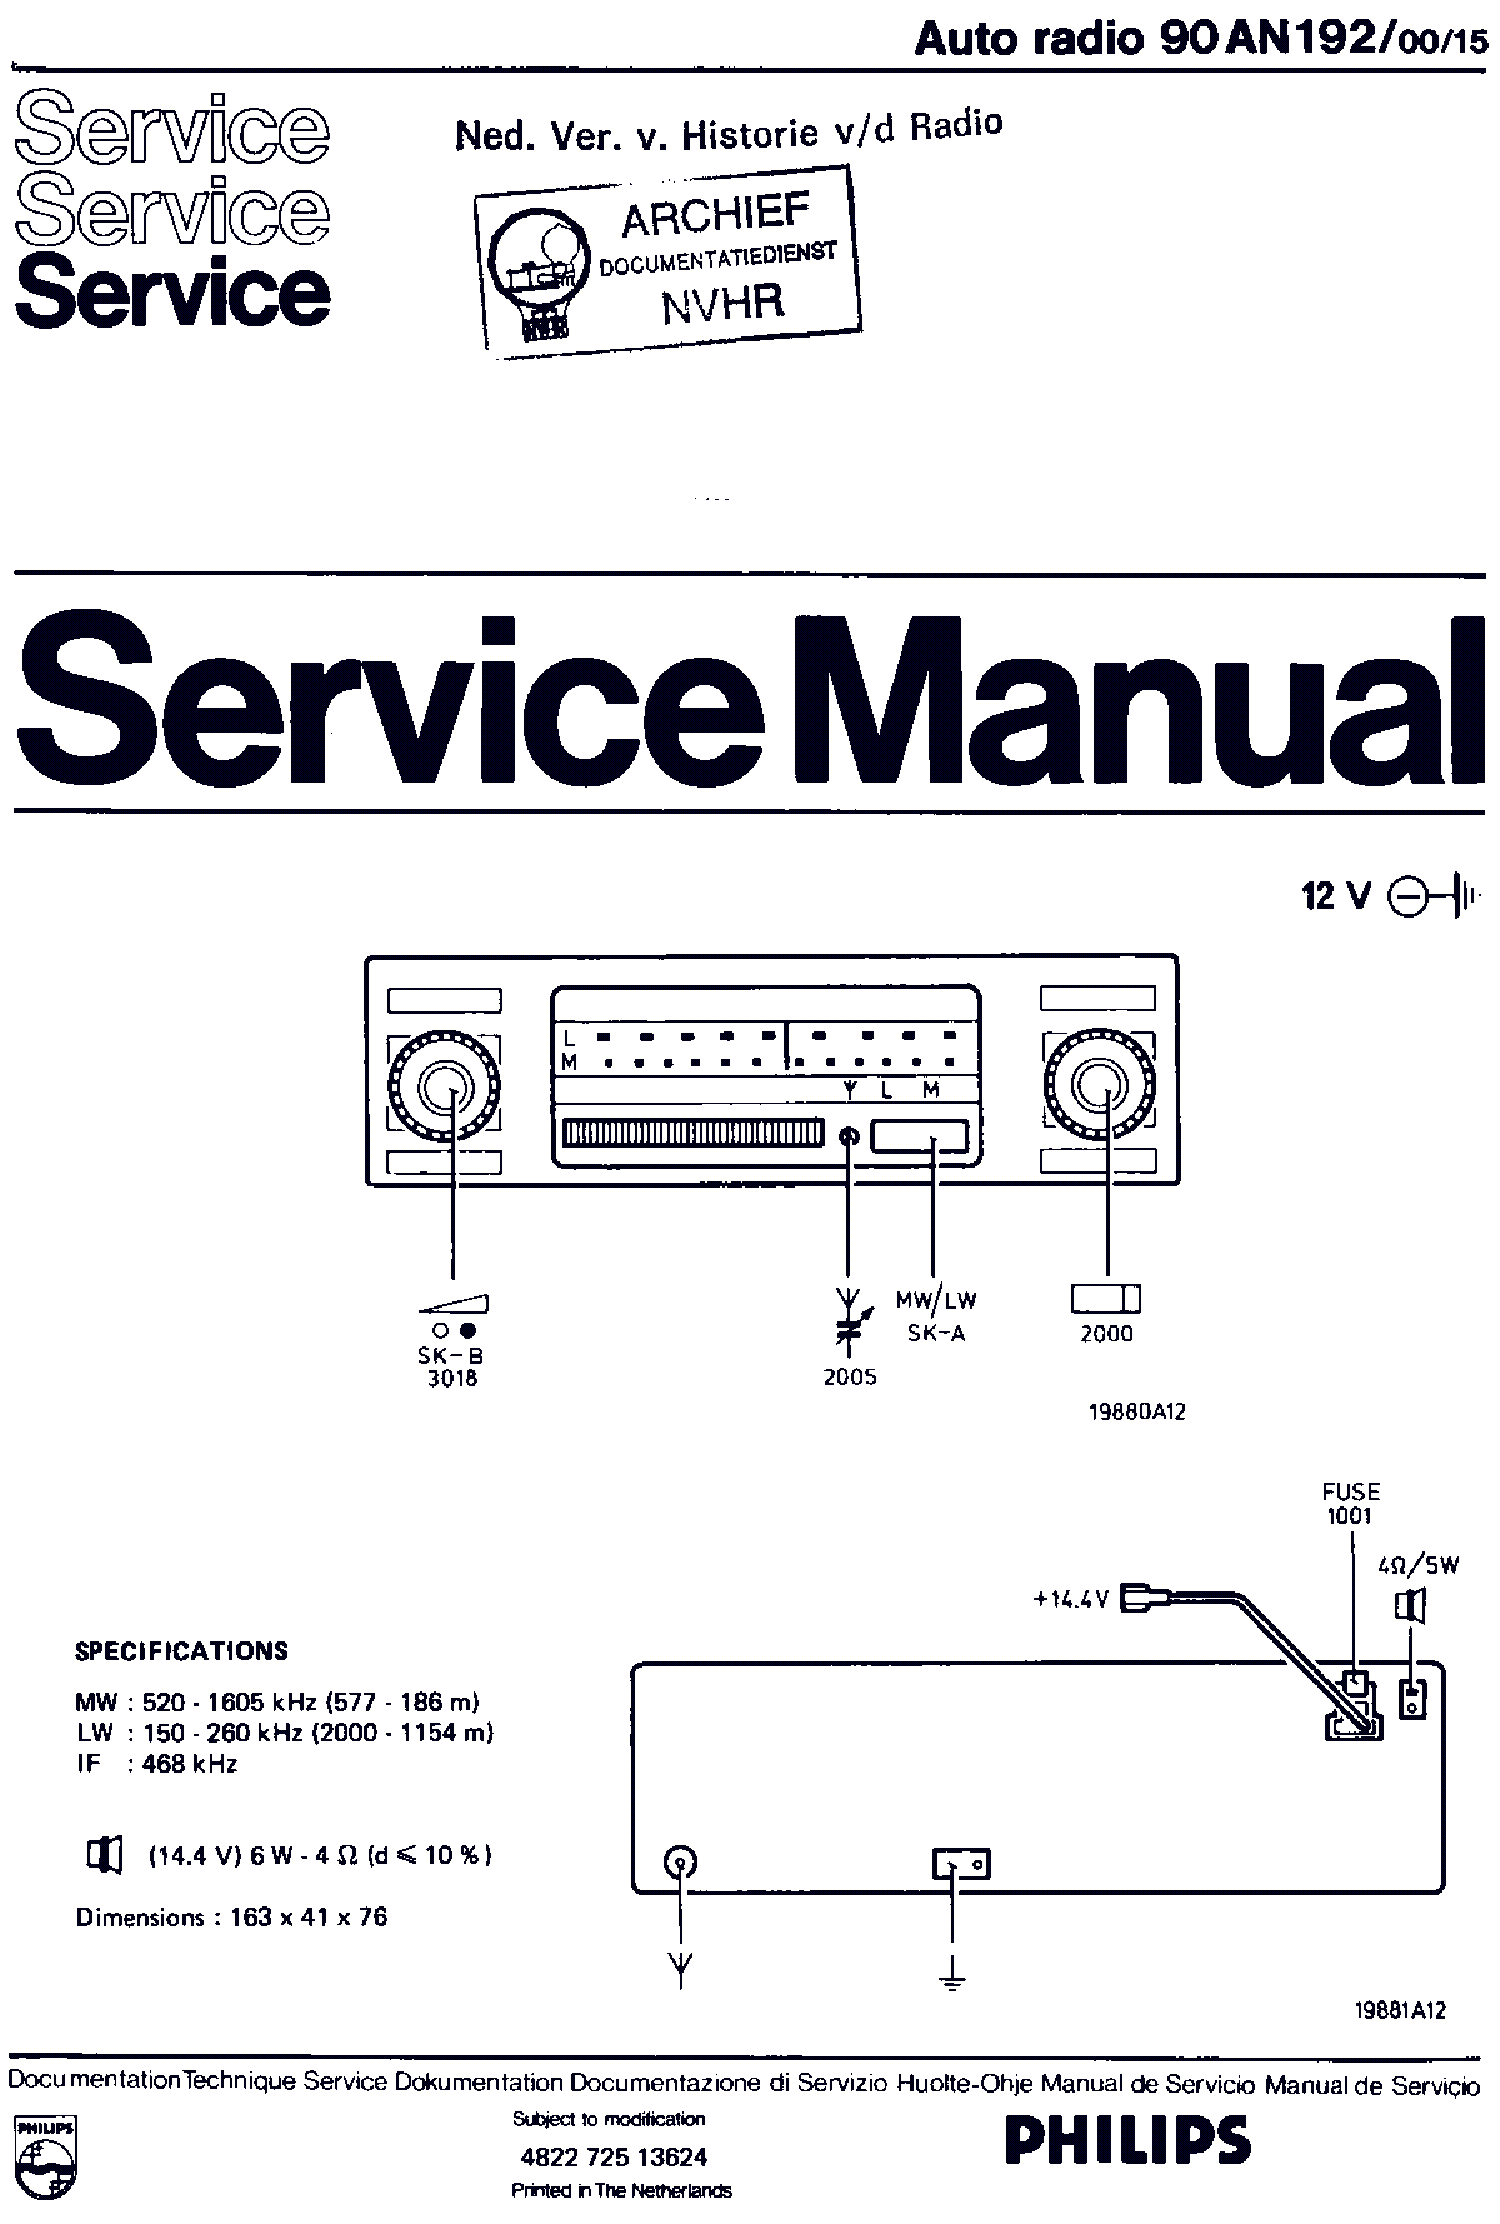 PHILIPS 90AN192-00-15 AUTO RADIO SM service manual (1st page)